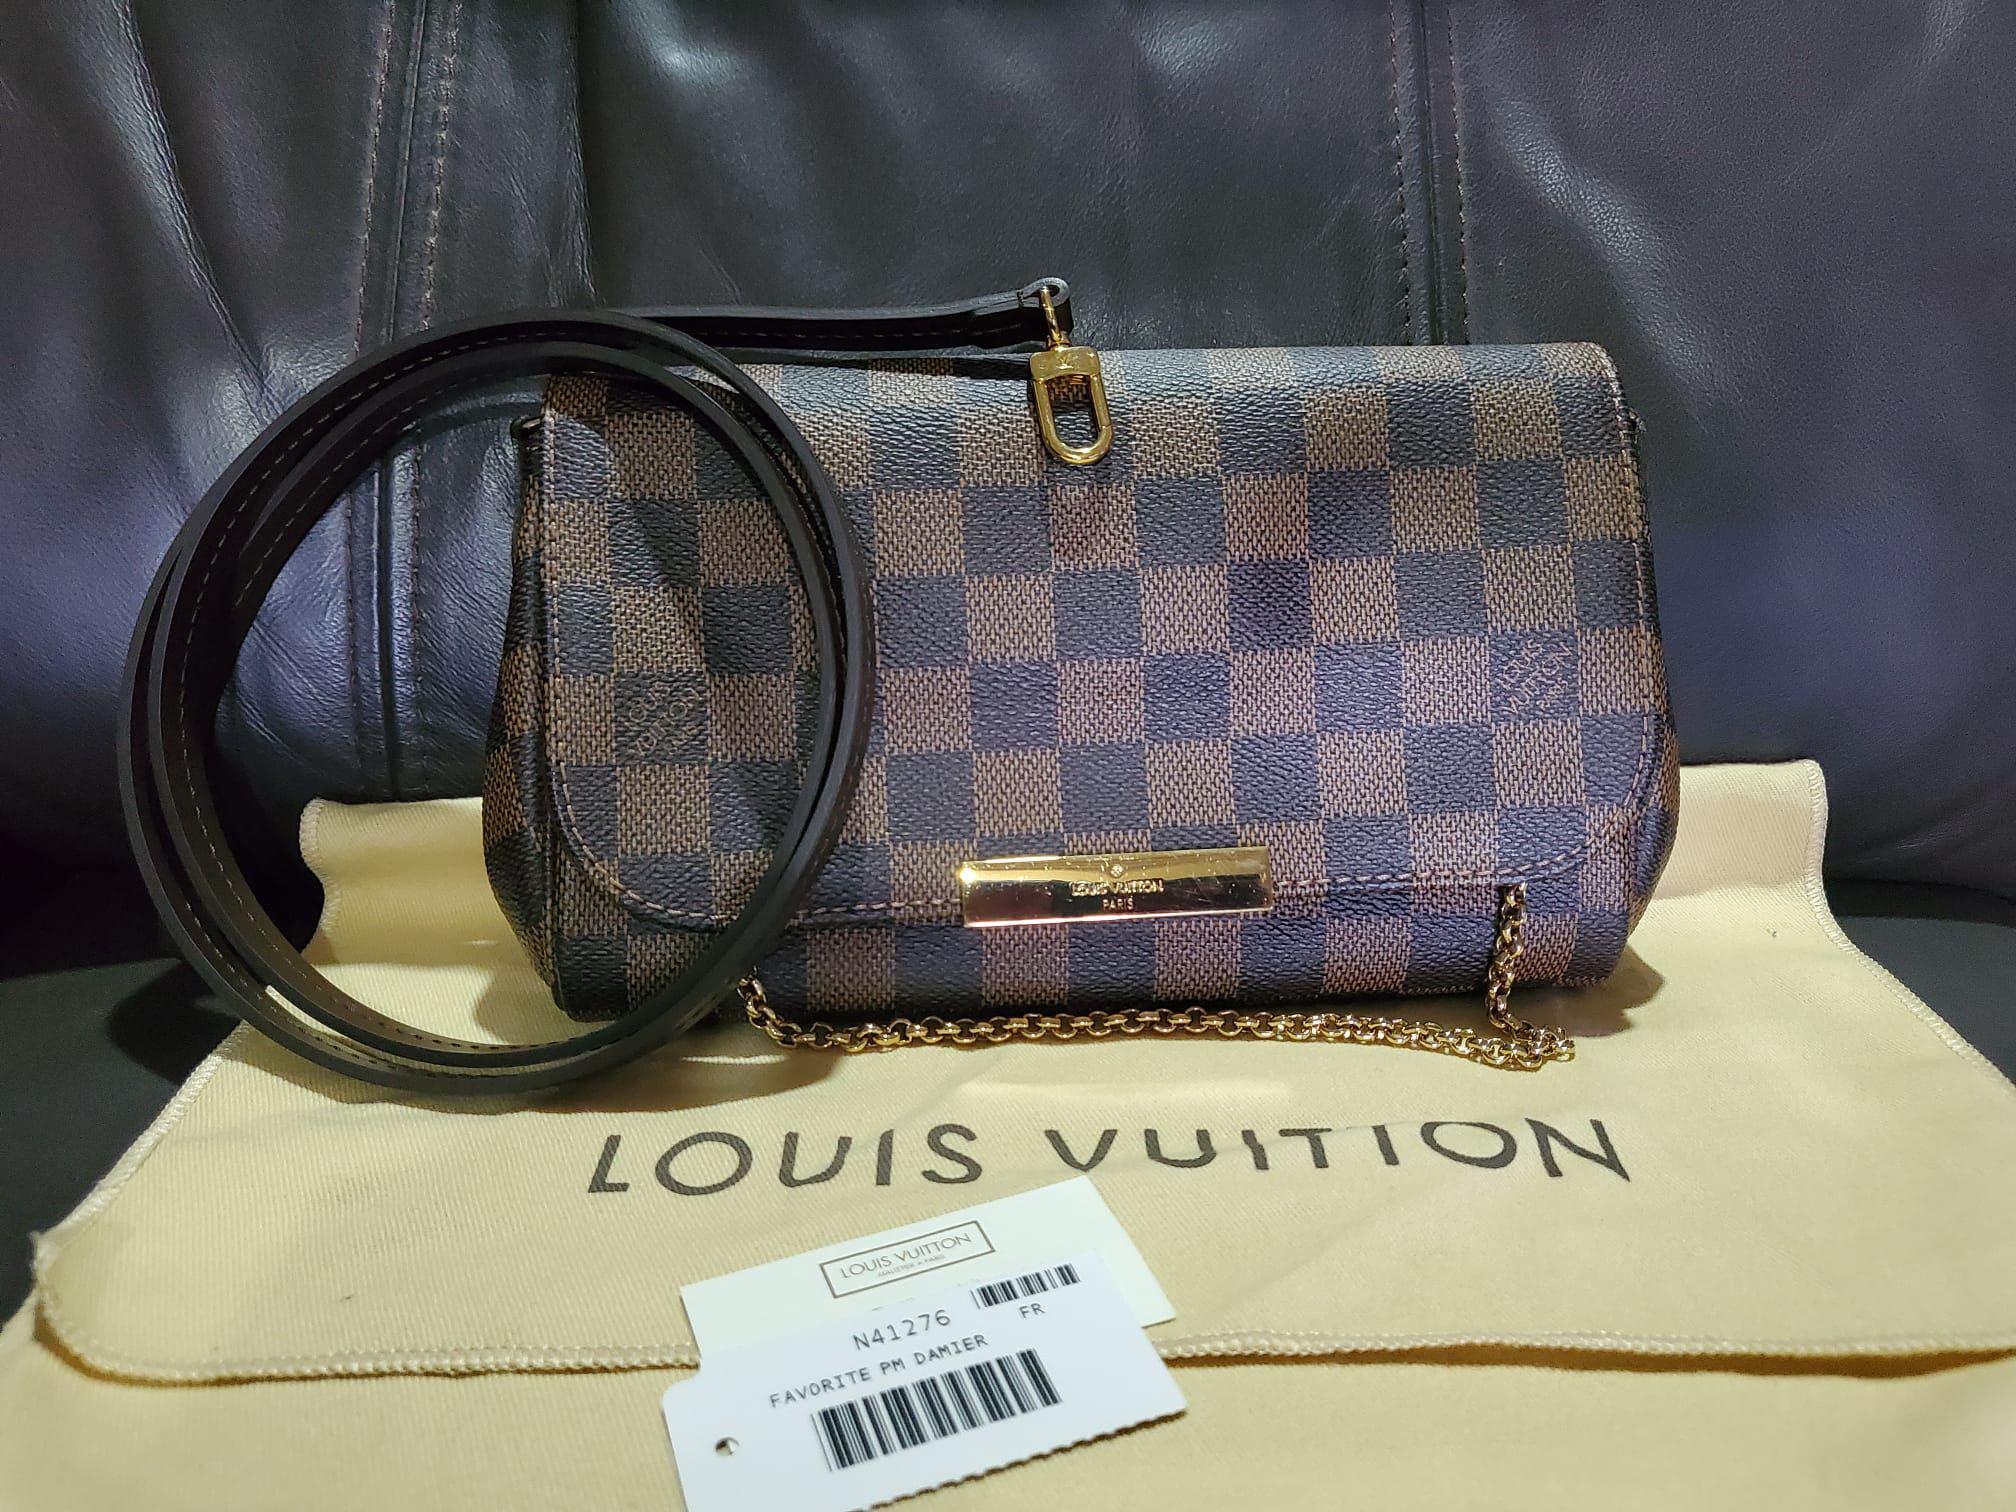 LOUIS VUITTON FAVORITE PM REVIEW! Is it worth it? What I don't like about  the bag!